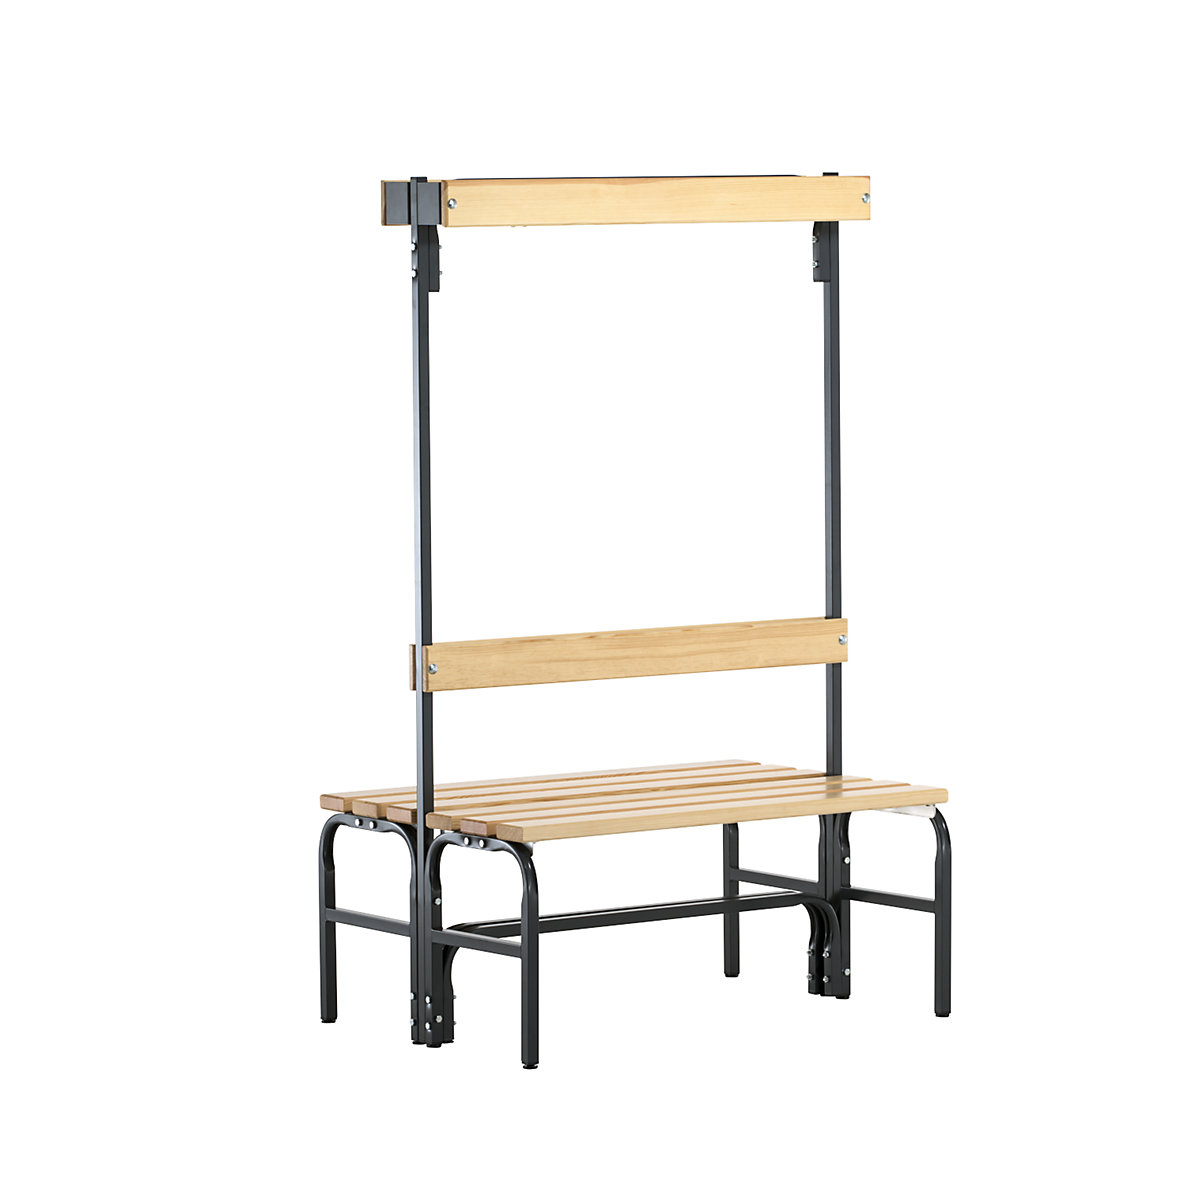 Cloakroom bench with hook strips – Sypro